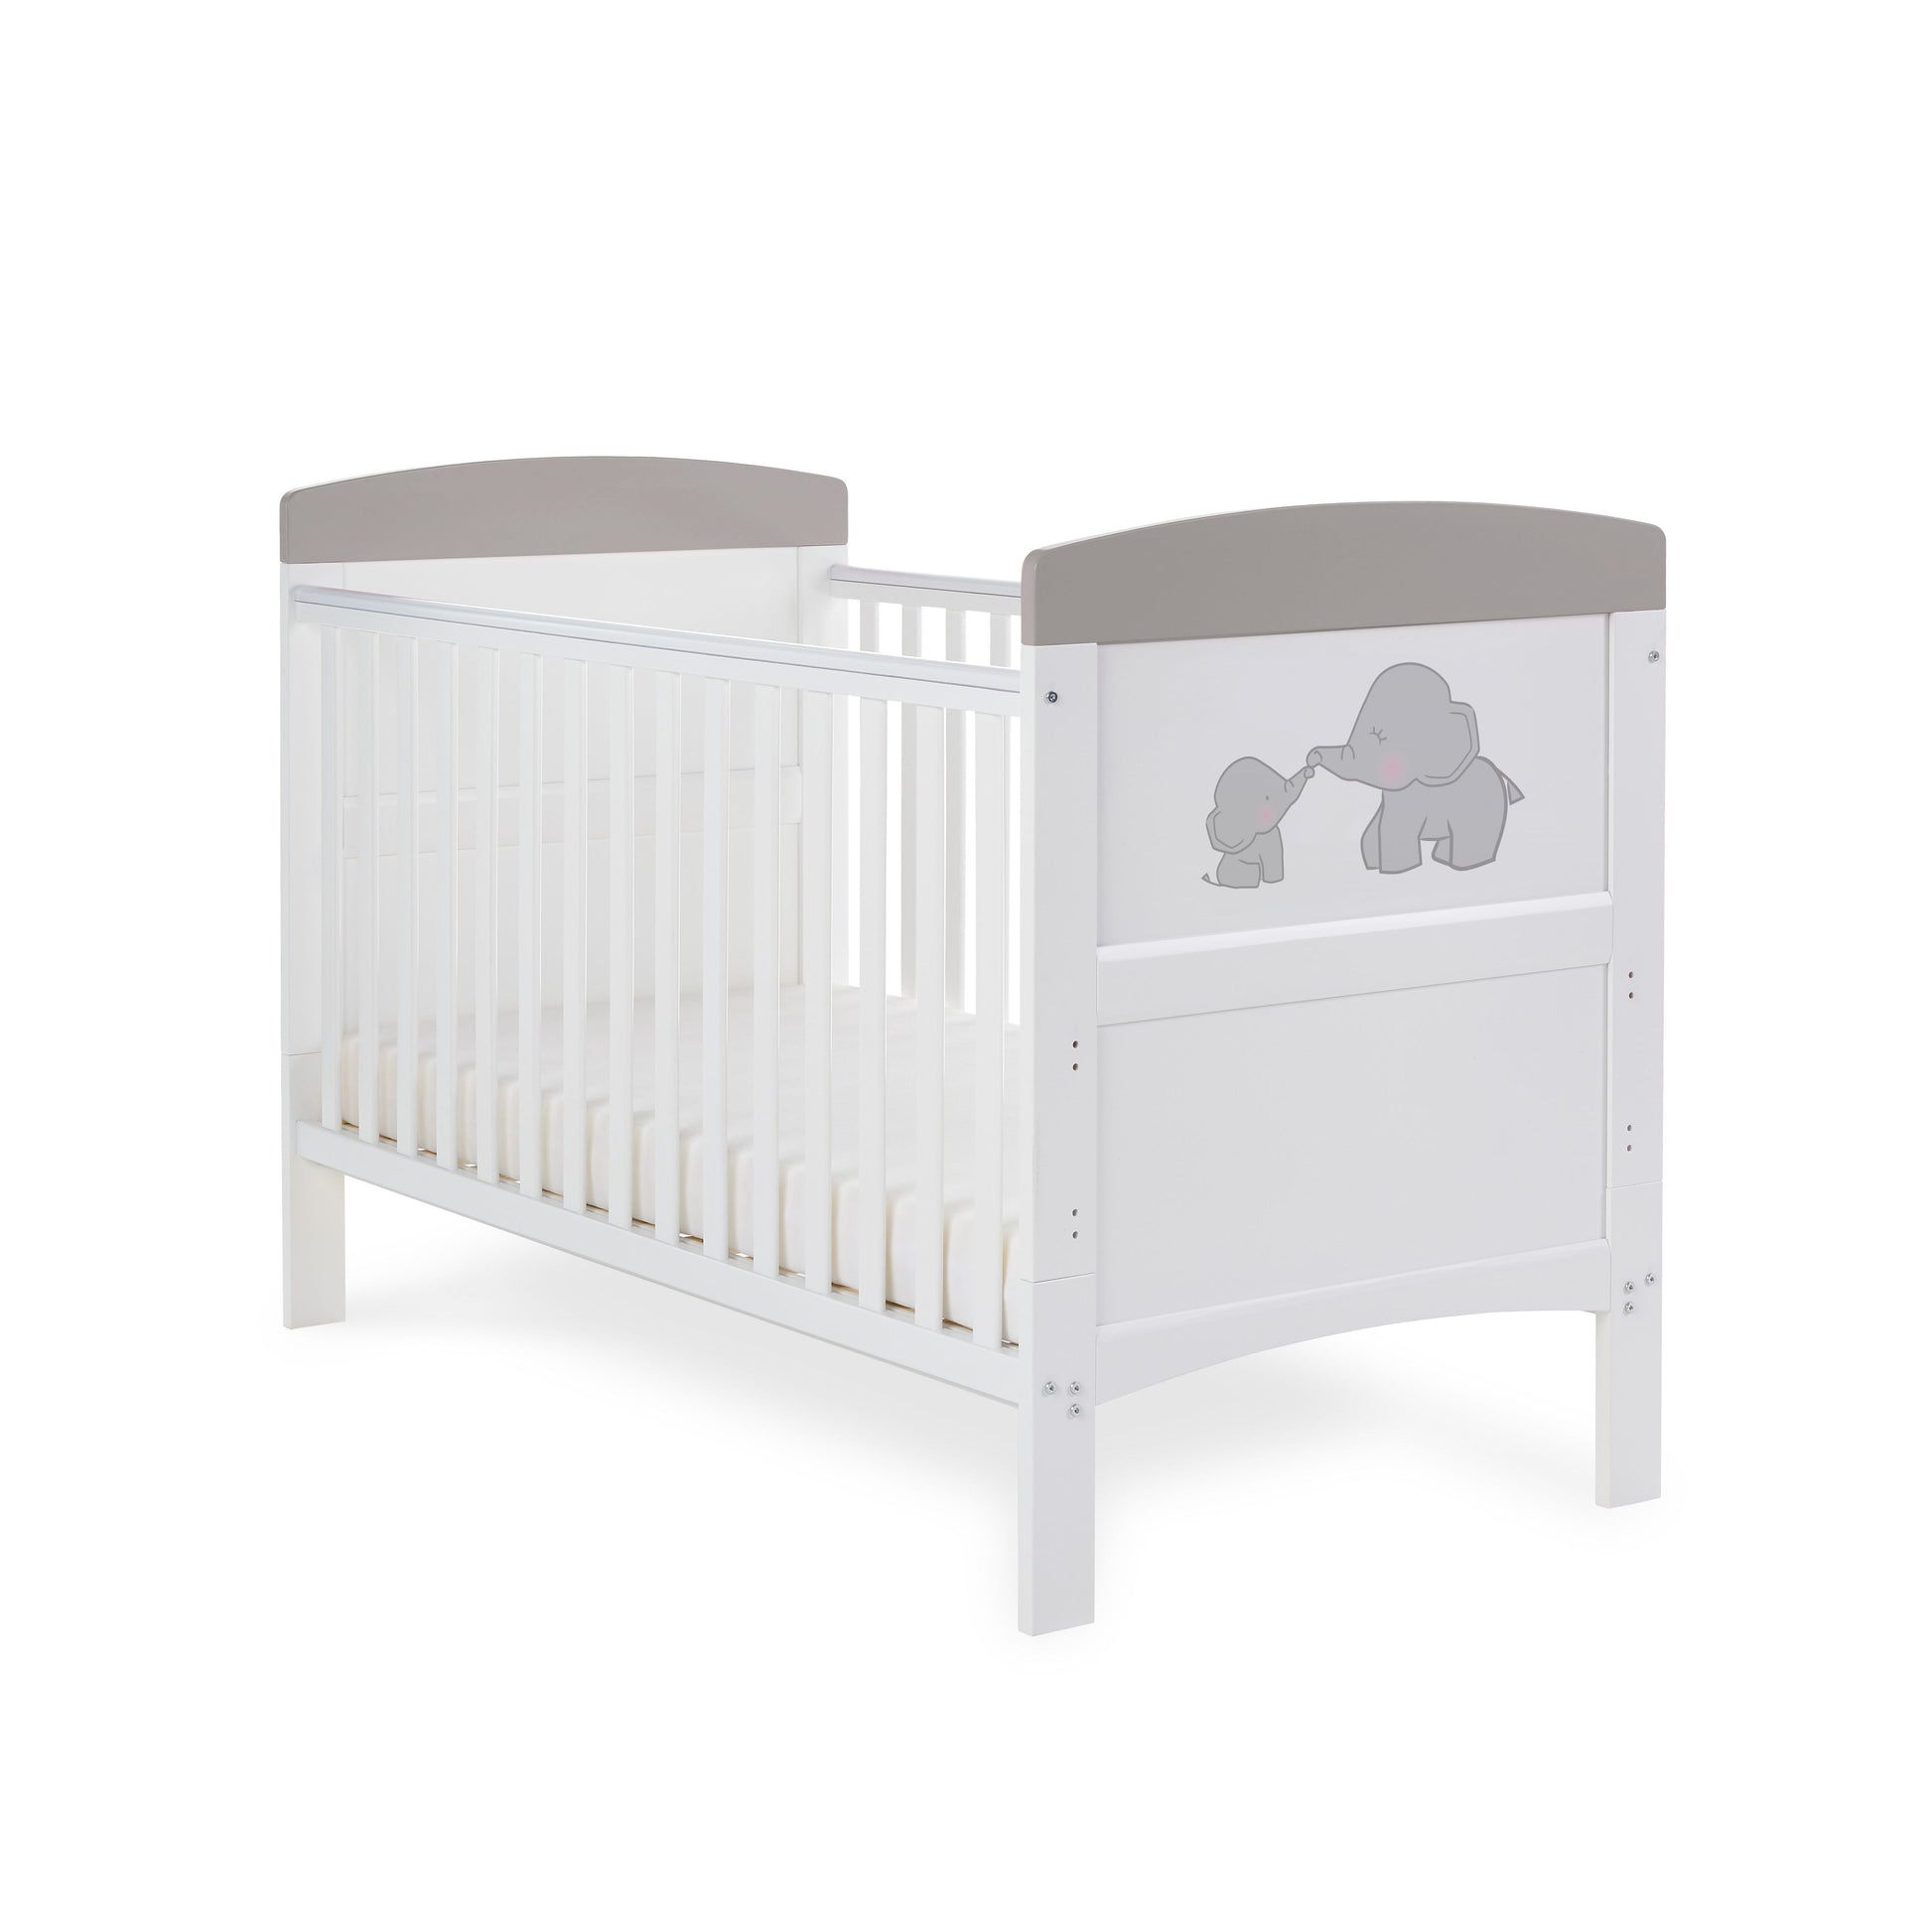 Obaby Grace Inspire Cot Bed - Me & Mini Me Elephants Pink & Grey - Land of Little